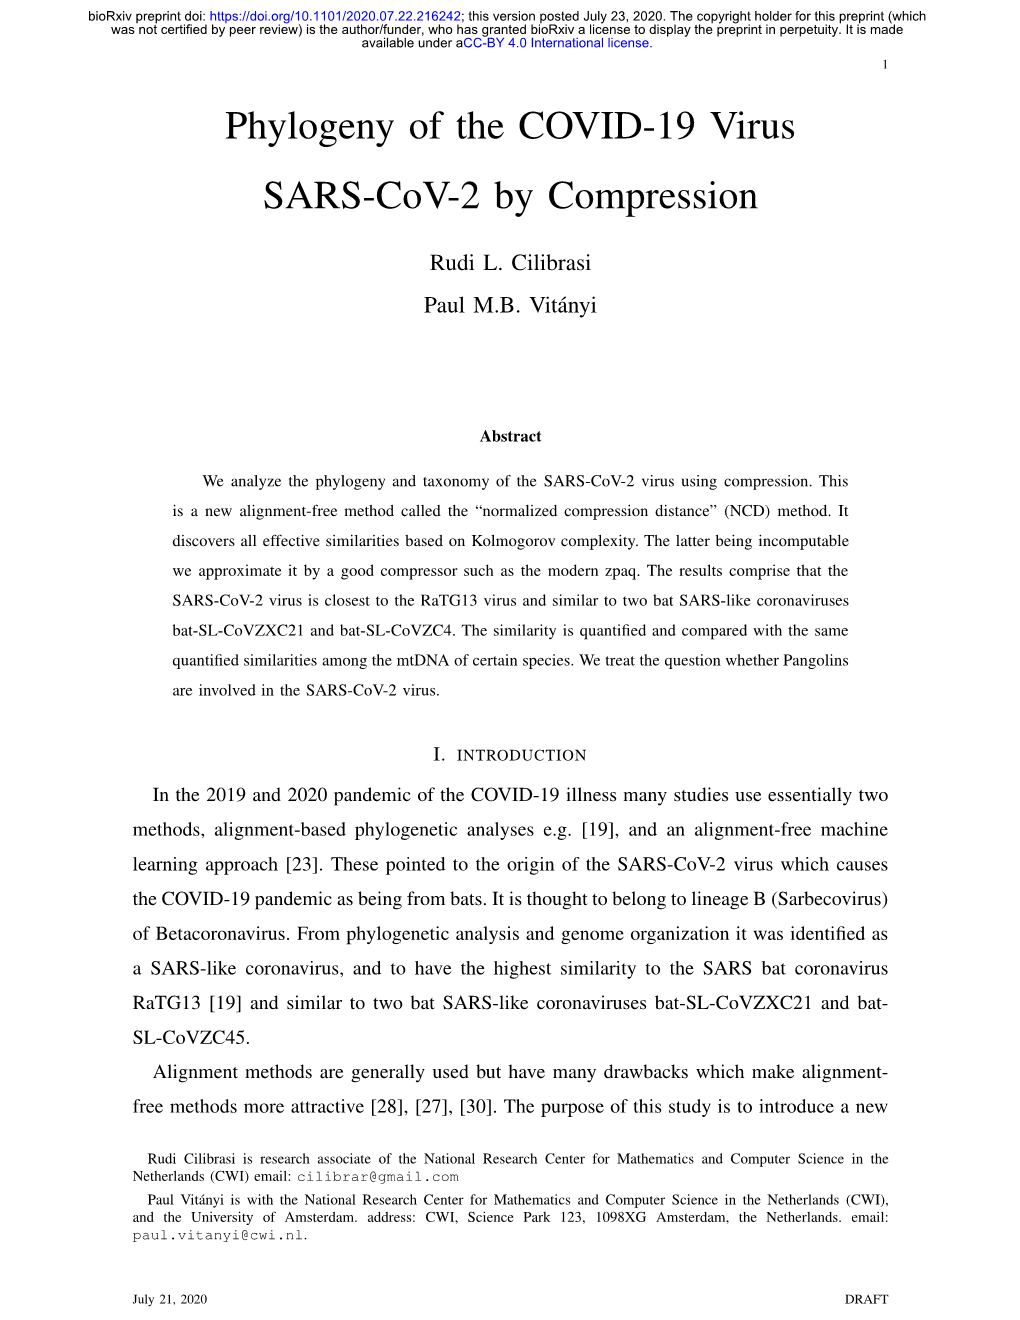 Phylogeny of the COVID-19 Virus SARS-Cov-2 by Compression